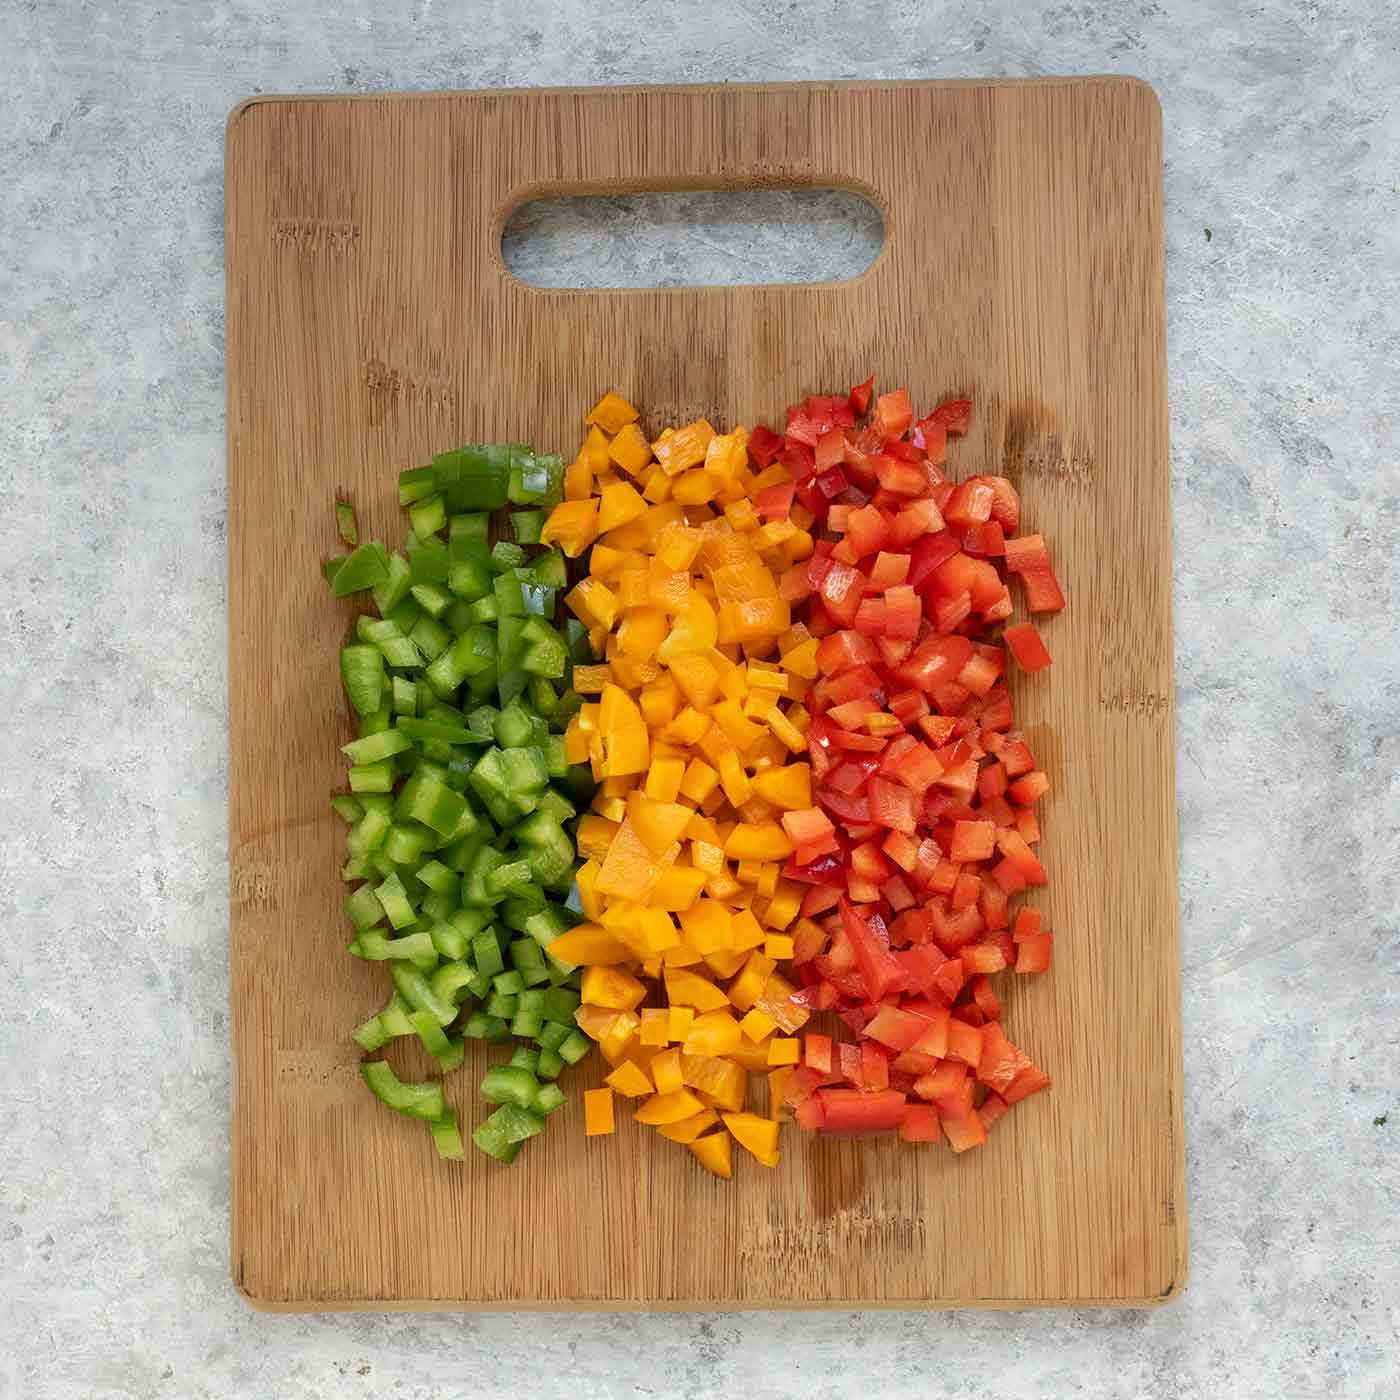 Chopped green, orange and red bell peppers on a wooden cutting board.